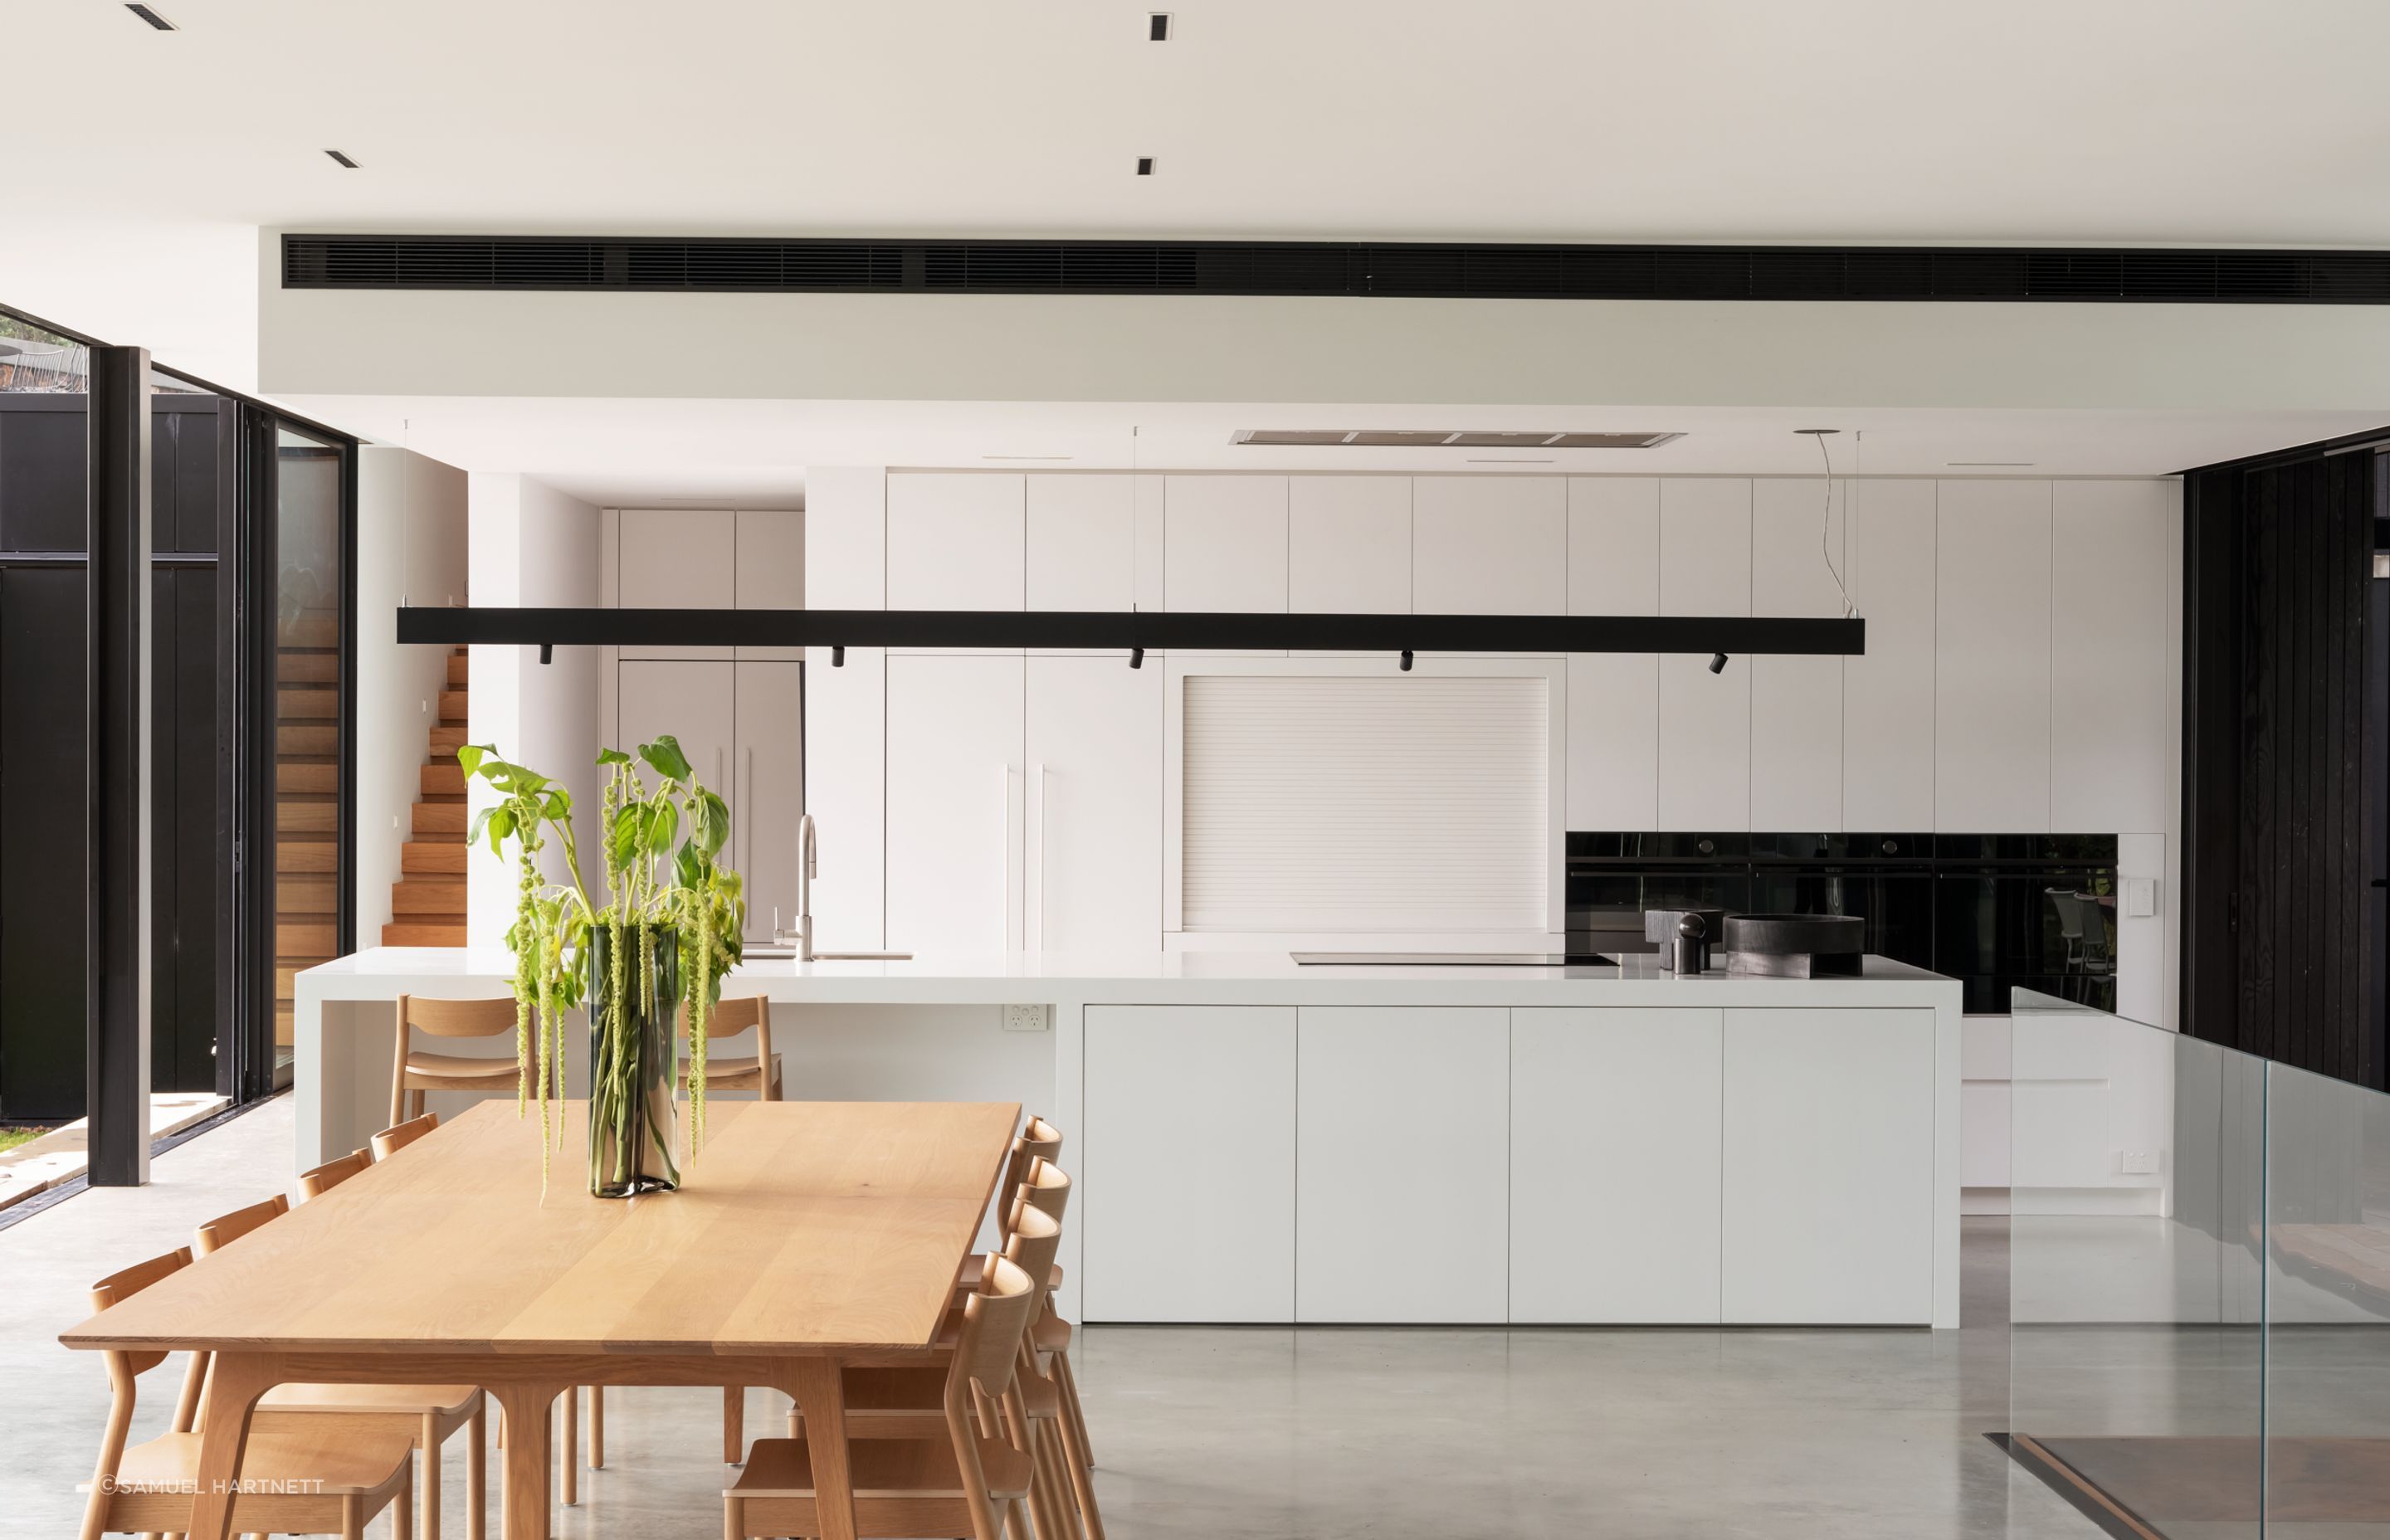 Daniel designed the kitchen to suit the client’s low-key approach. Most appliances are Fisher &amp; Paykel. The Swiss kitchen mixer is from Plumbline, and the benchtops are Corian.